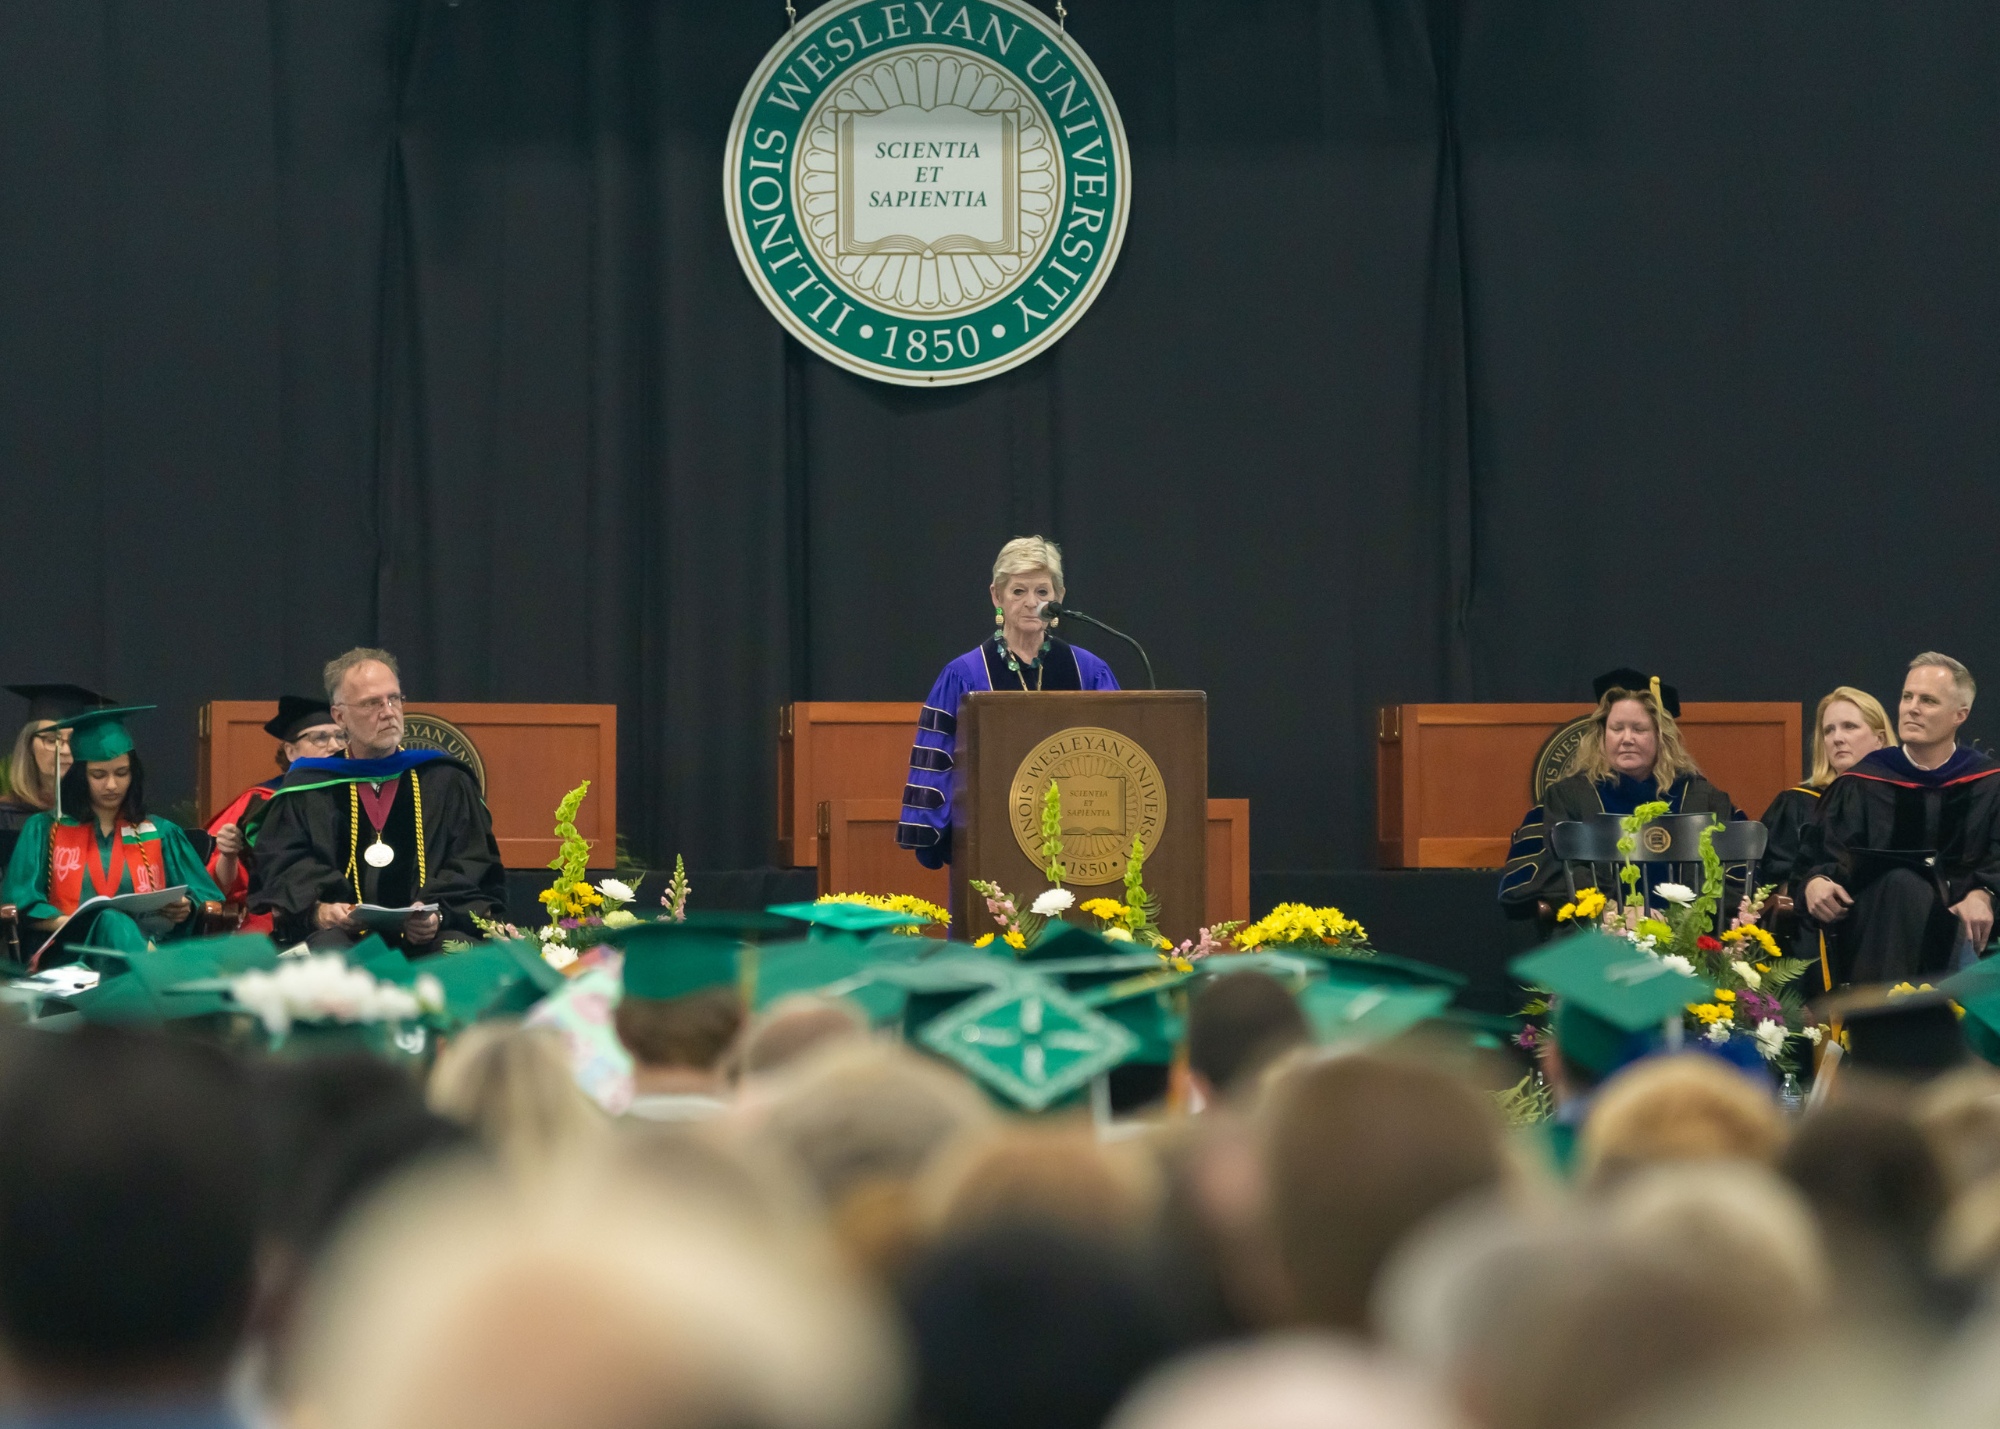 Illinois Wesleyan president speaking on stage at commencement